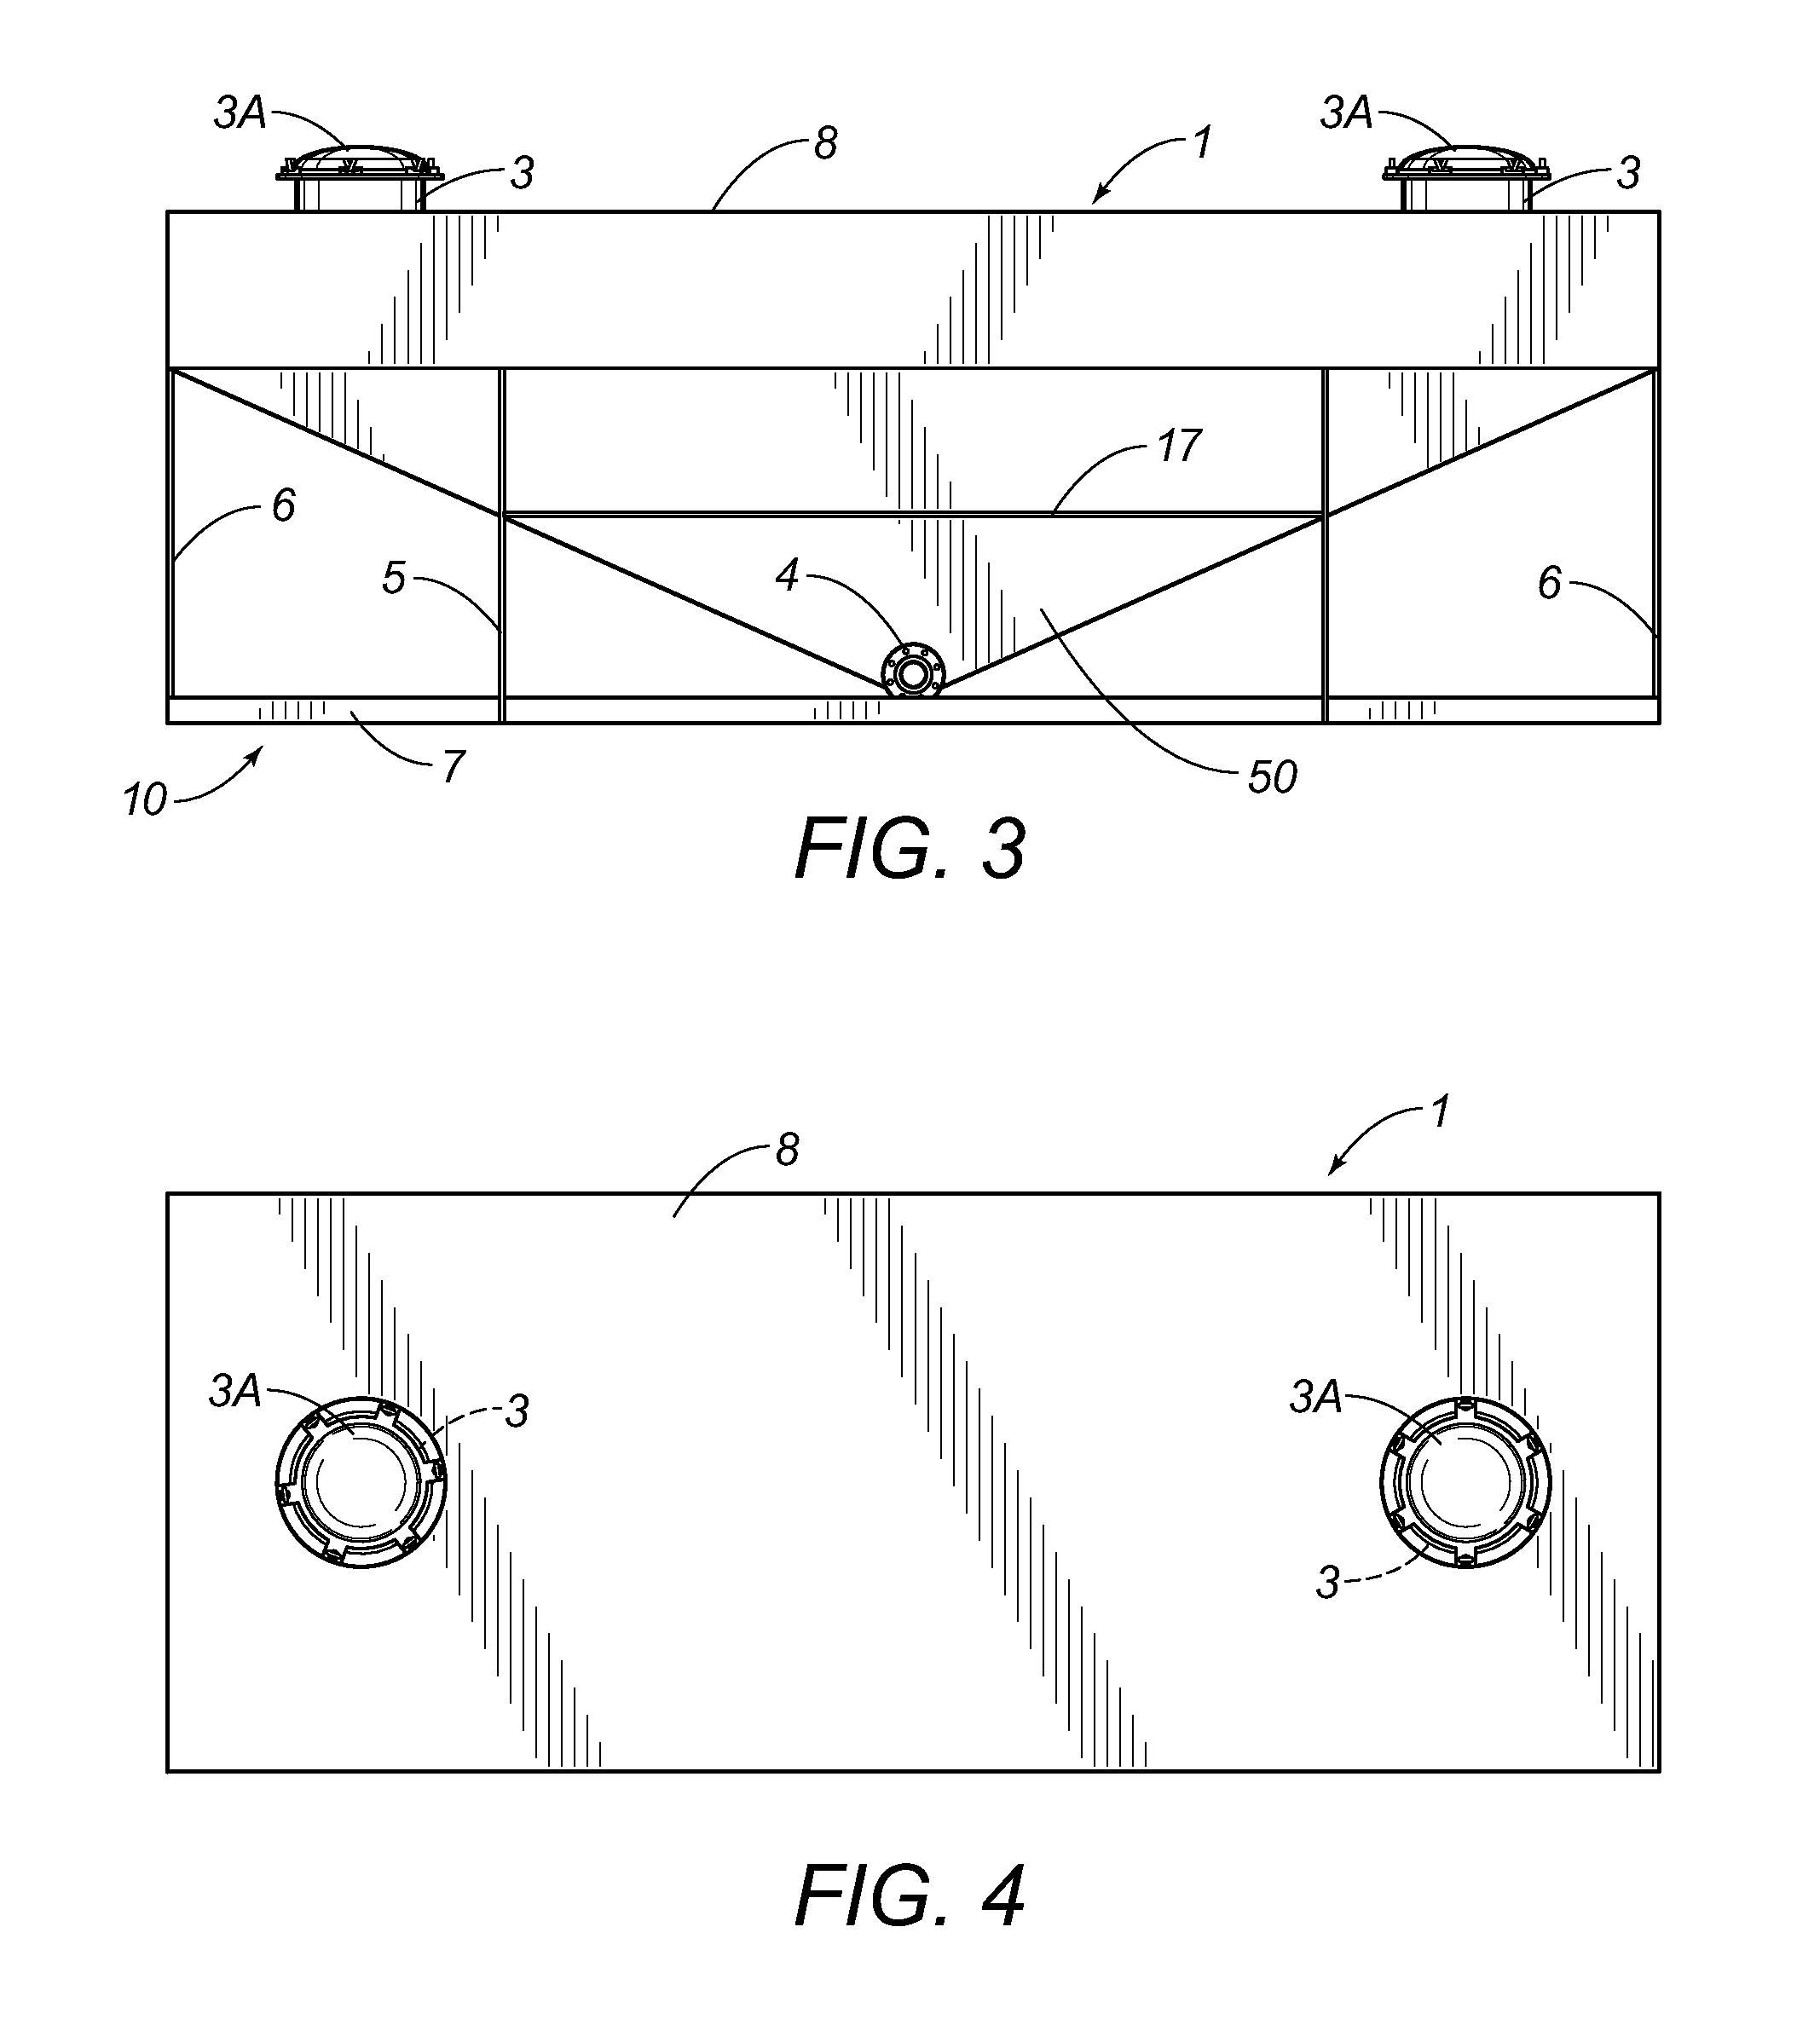 Apparatus for transporting frac sand in intermodal container